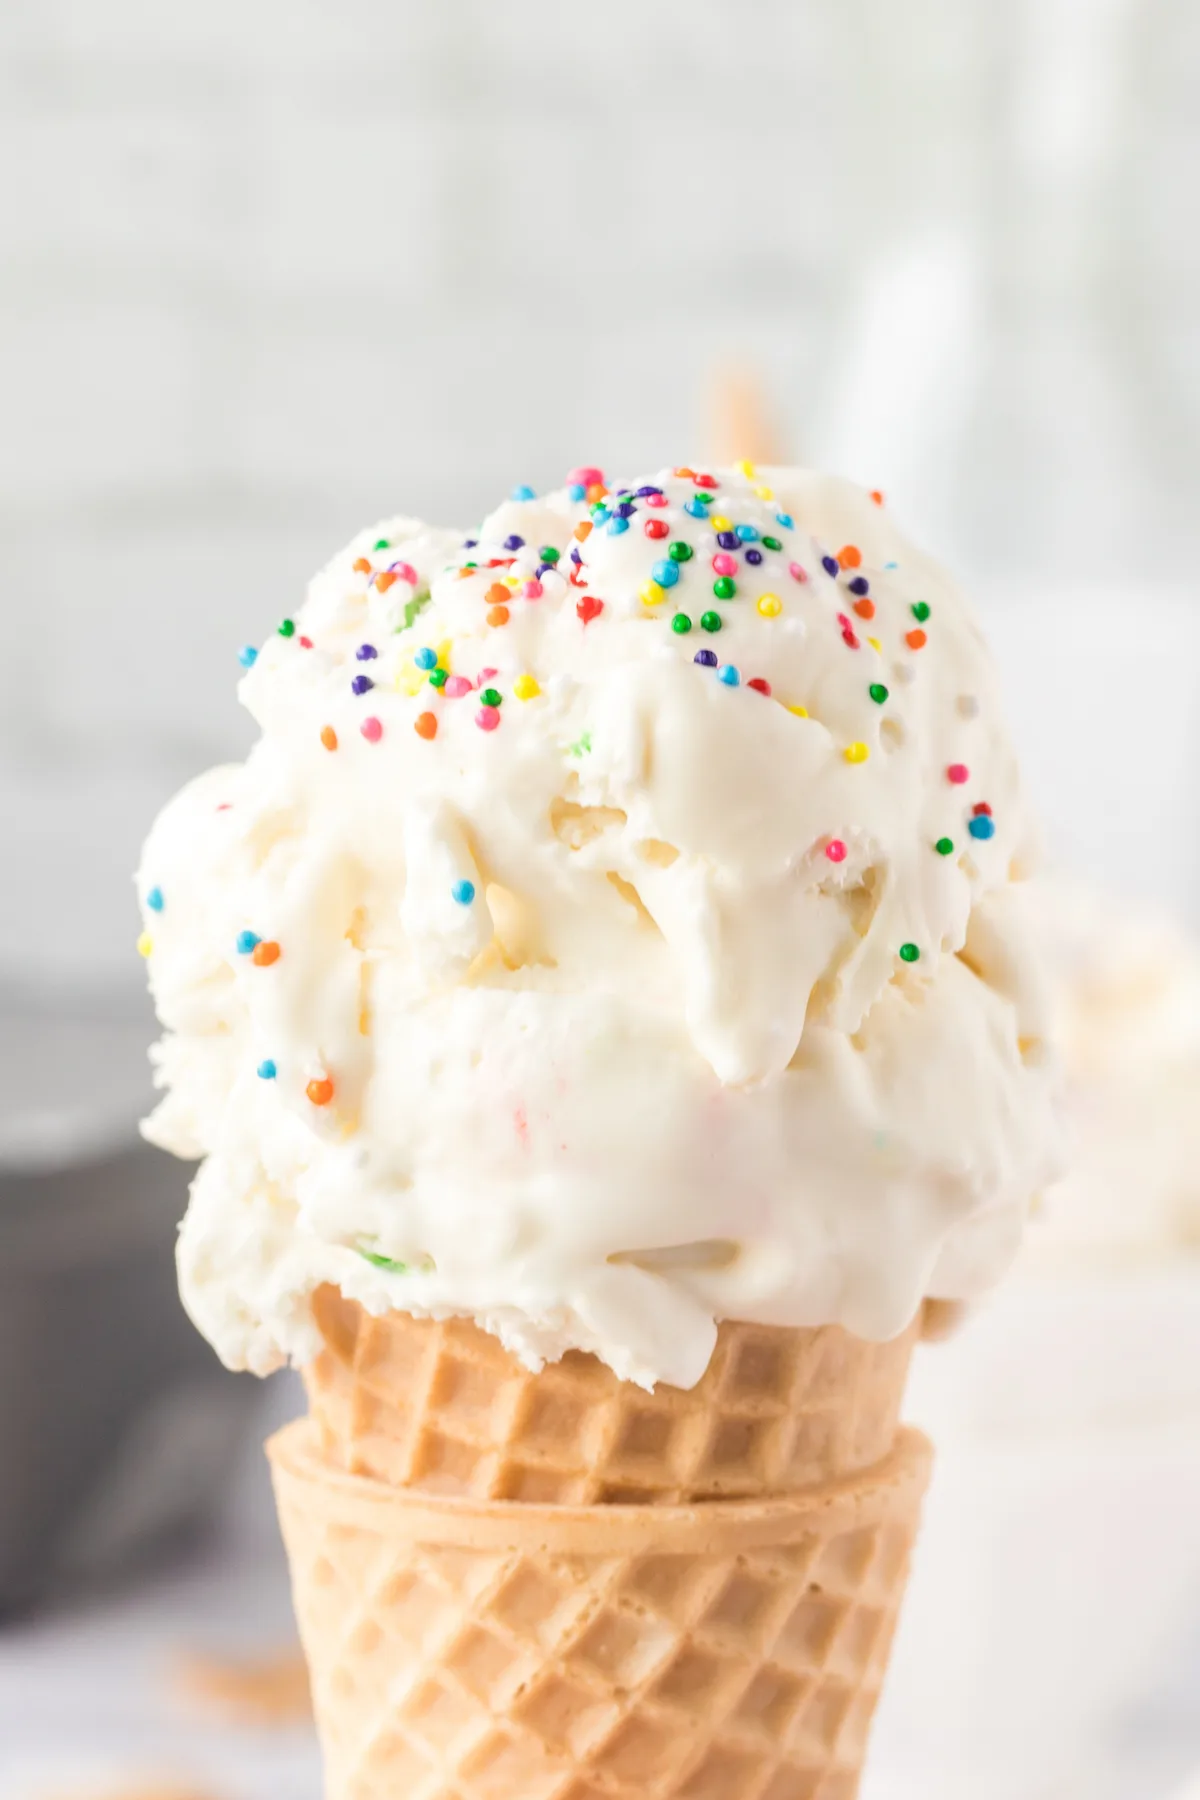 up close view of ice cream scoops in a cone topped with sprinkles